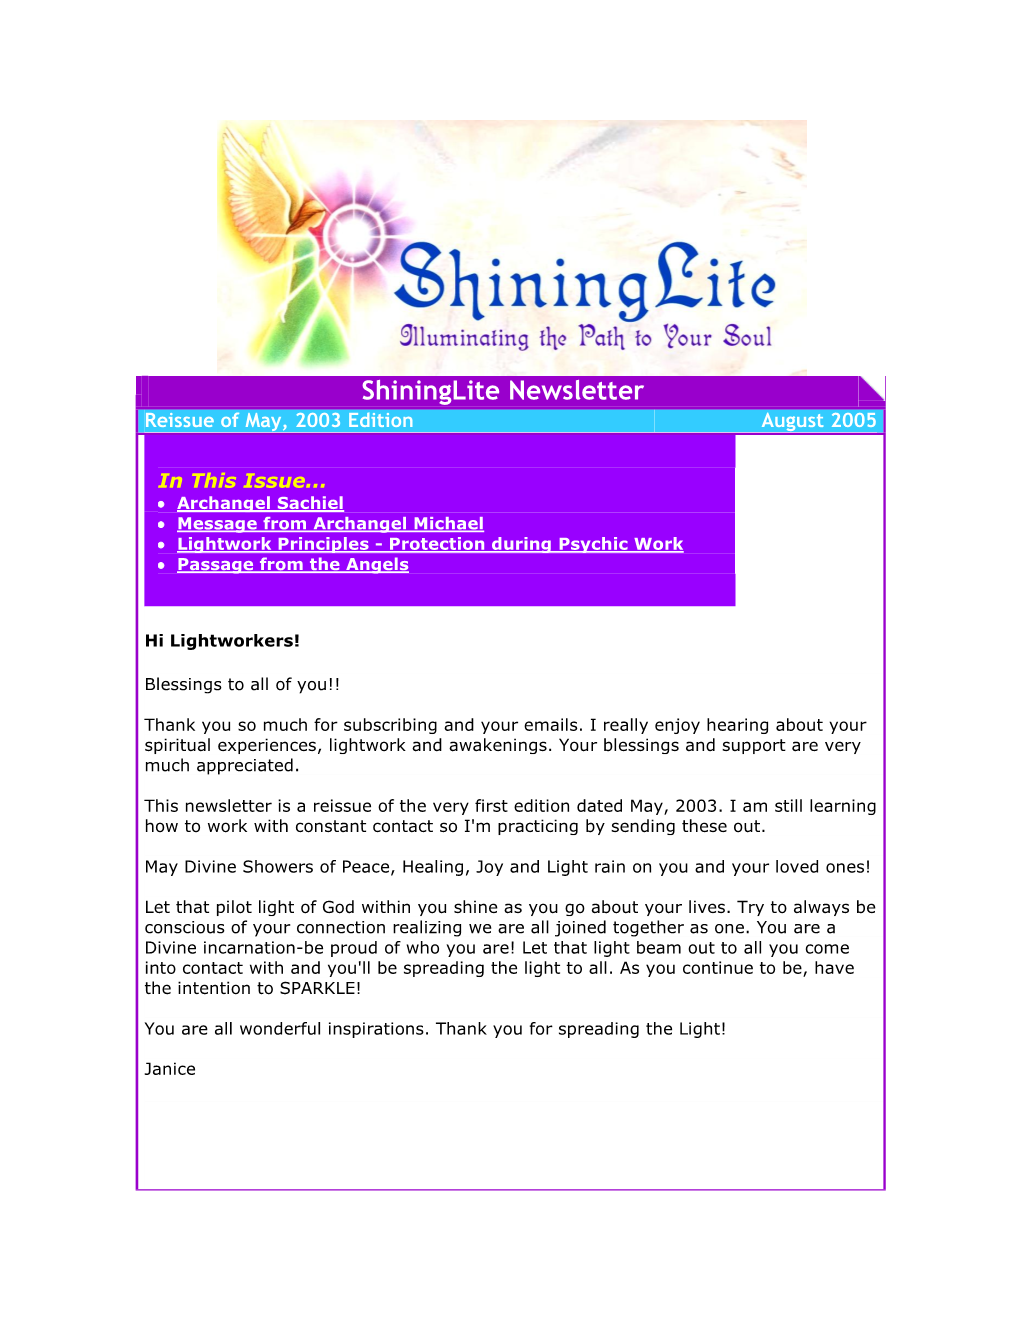 Shininglite Newsletter Reissue of May, 2003 Edition August 2005